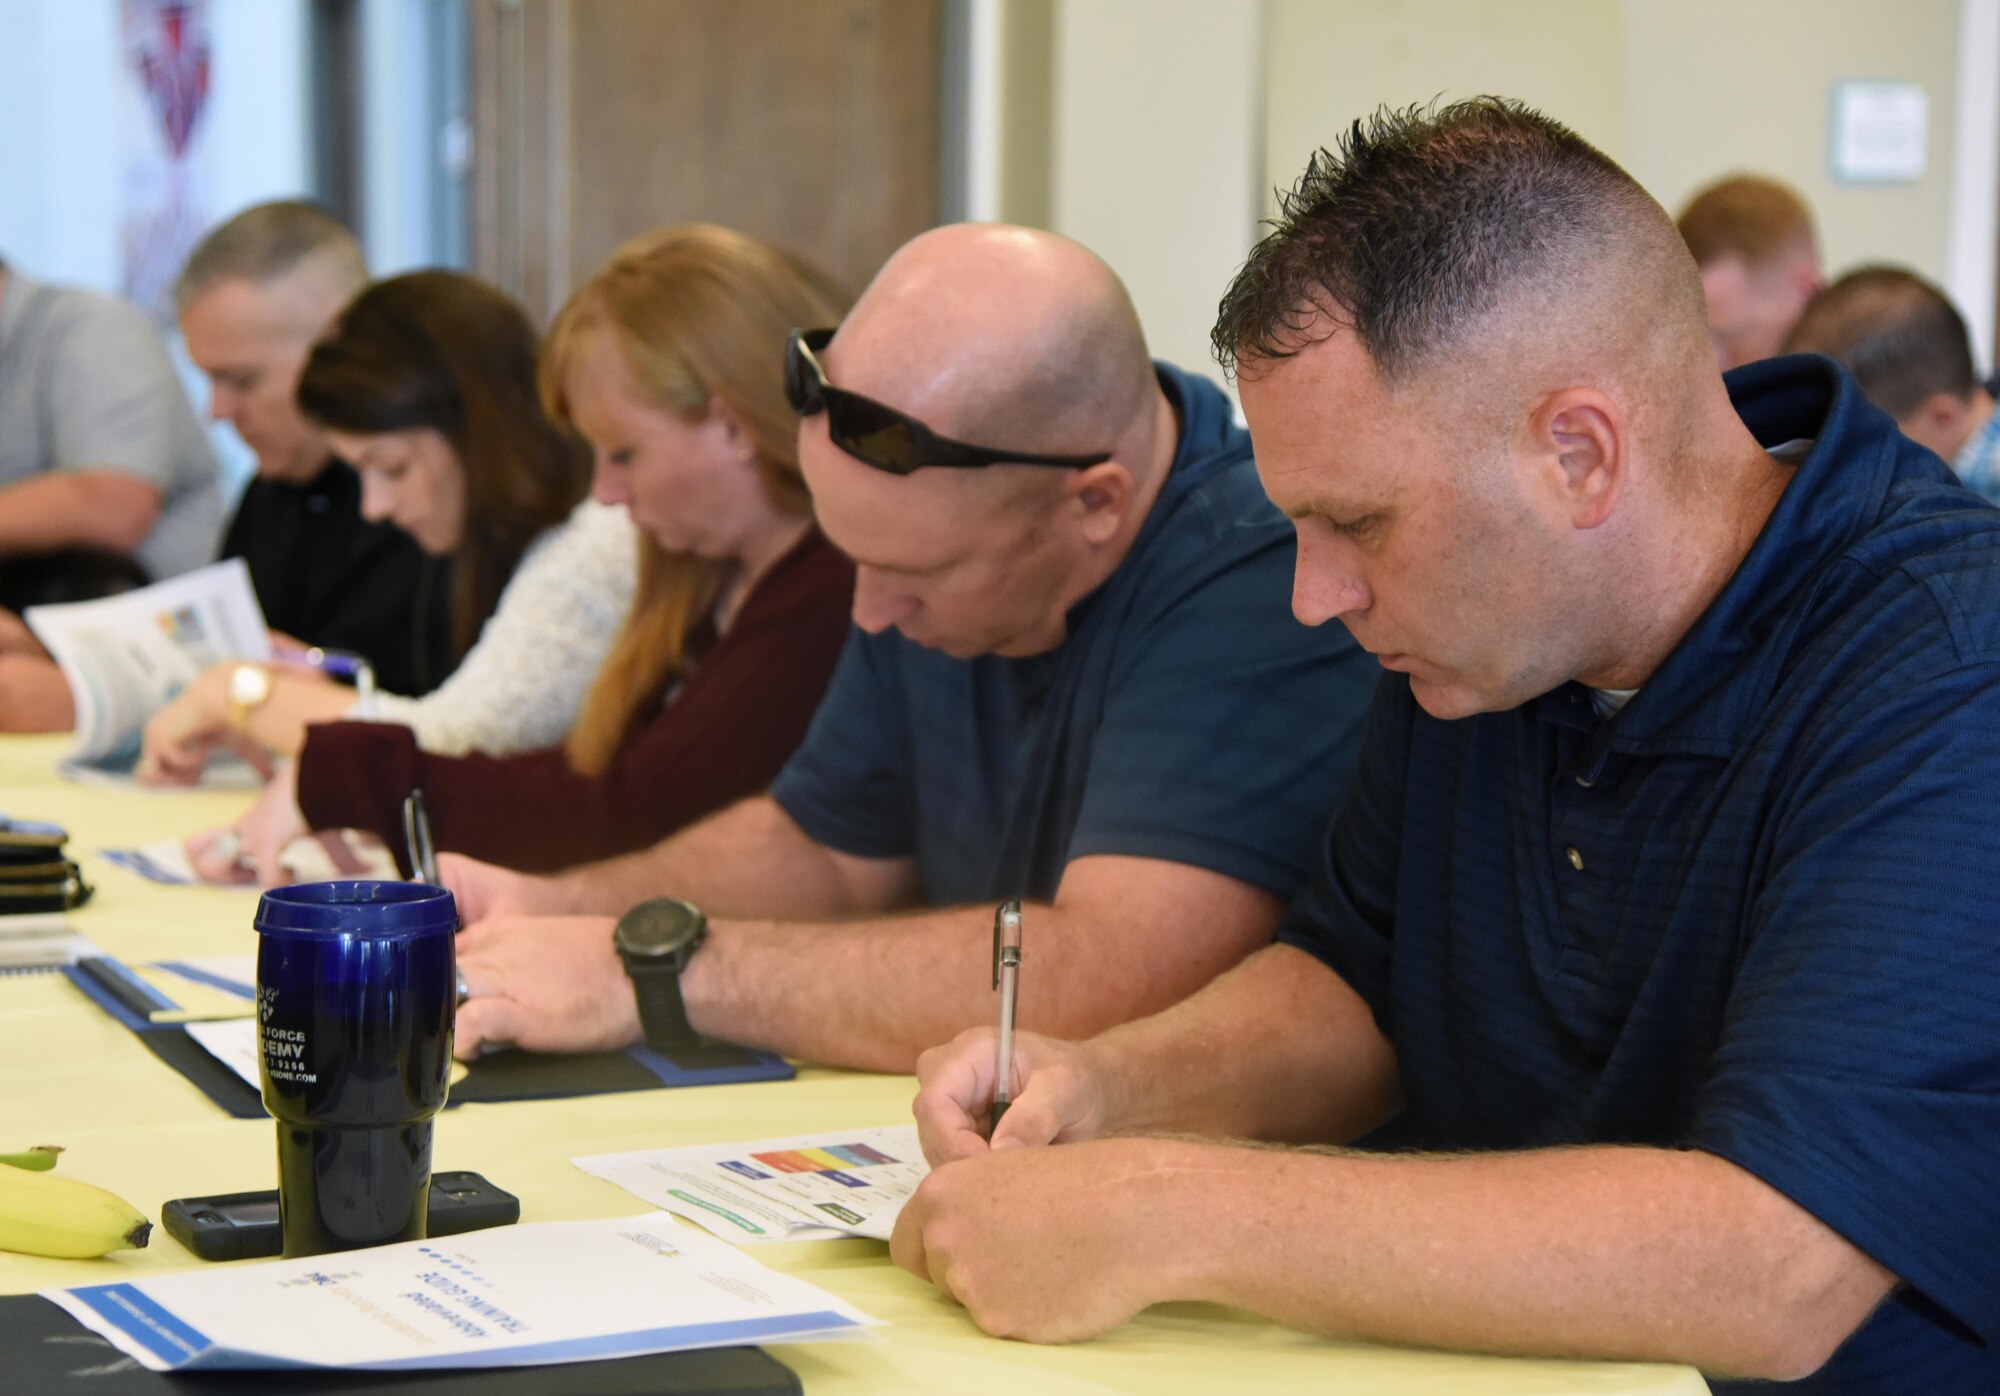 U.S. Air Force Chief Master Sgt. Anthony Fisher, 81st Training Group superintendent, participates in a leadership behavior assessment project during the 81st Training Wing Fall 2018 Off-Site Commander's Conference at The Salvation Army Kroc Center in Biloxi, Mississippi, Nov. 6, 2018. Keesler leadership participated in the two-day event that allowed senior leaders to step away from their day-to-day activities and focus on improving themselves as leaders. (U.S. Air Force photo by Kemberly Groue)